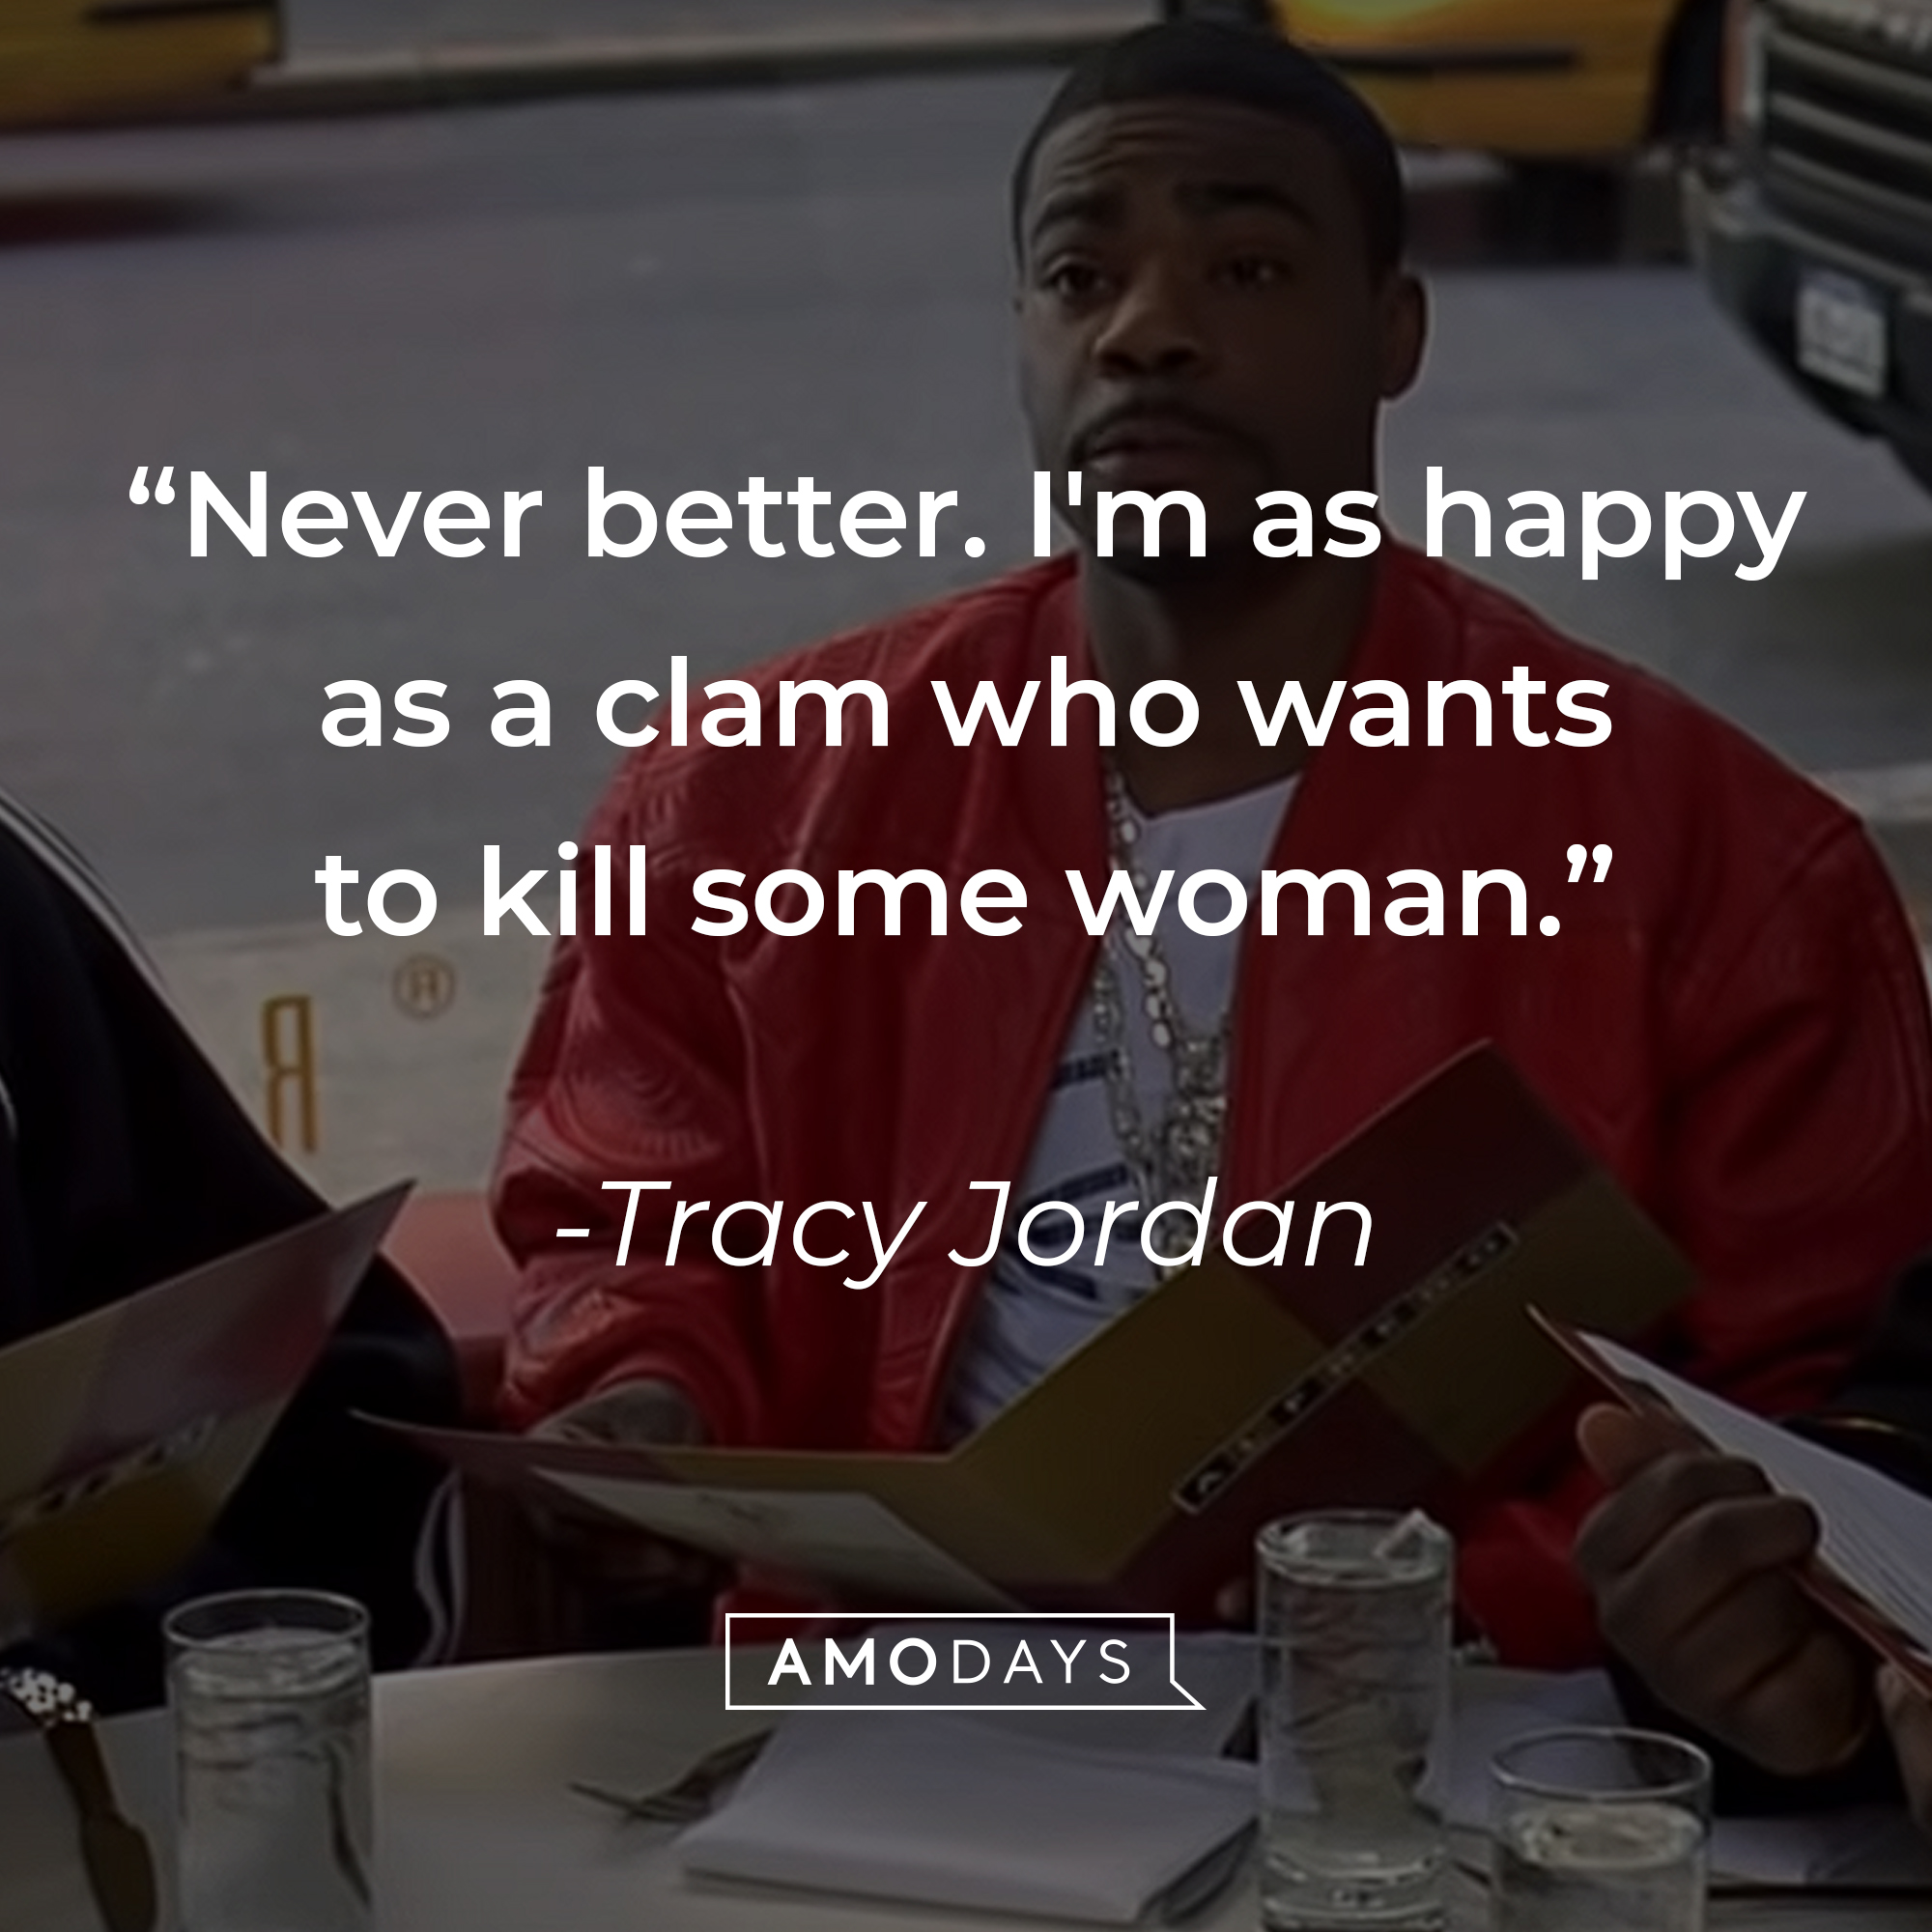 Tracy Jordan's quote, "Never better. I'm as happy as a clam who wants to kill some woman." | Source: facebook.com/30RockTV